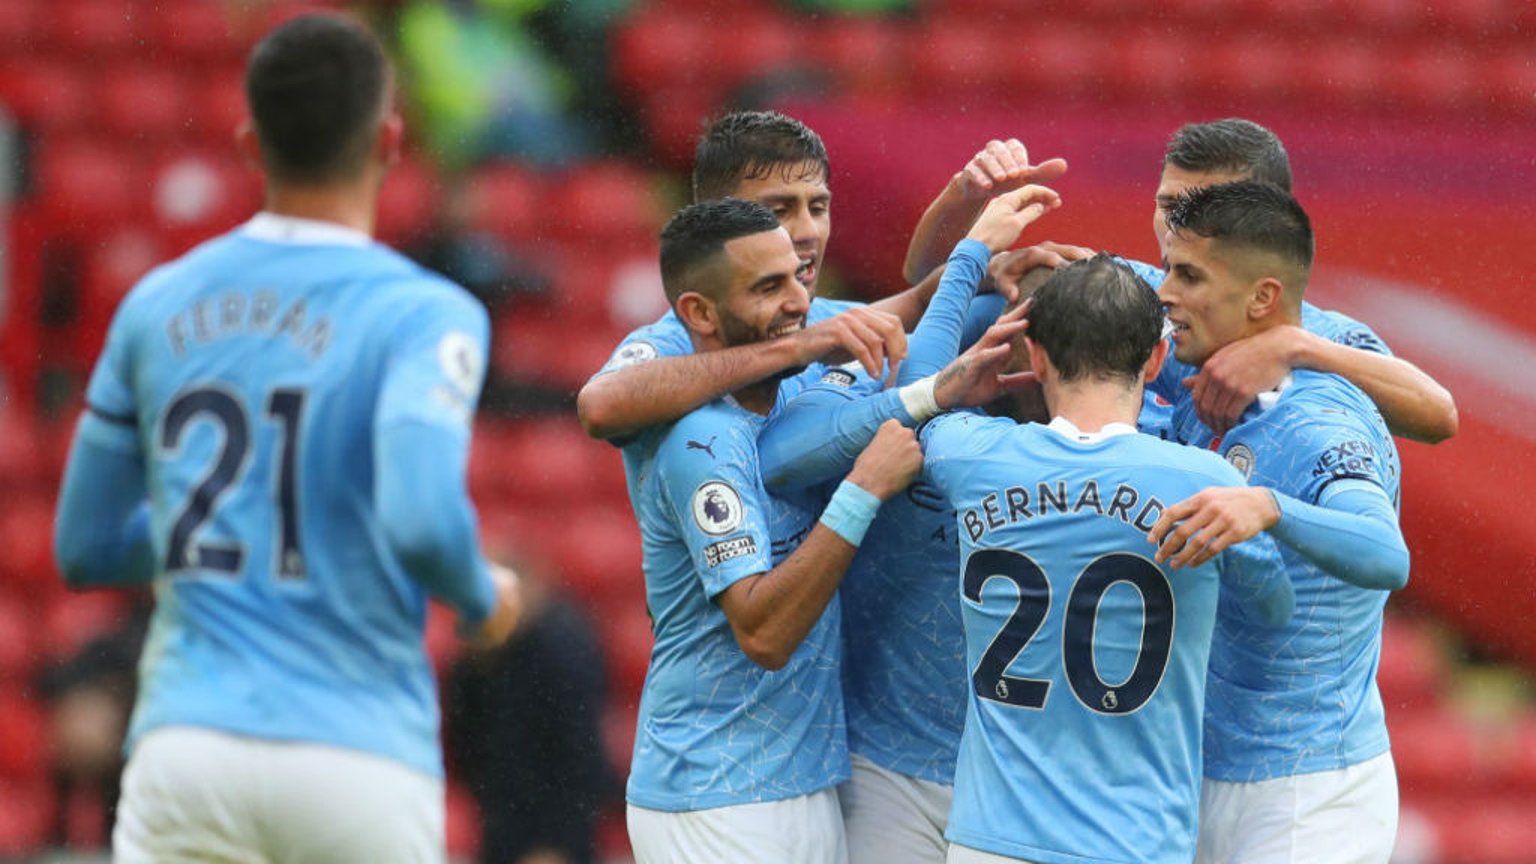 ON THE MARK: Kyle Walker is mobbed by his City team-mates after breaking the deadlock